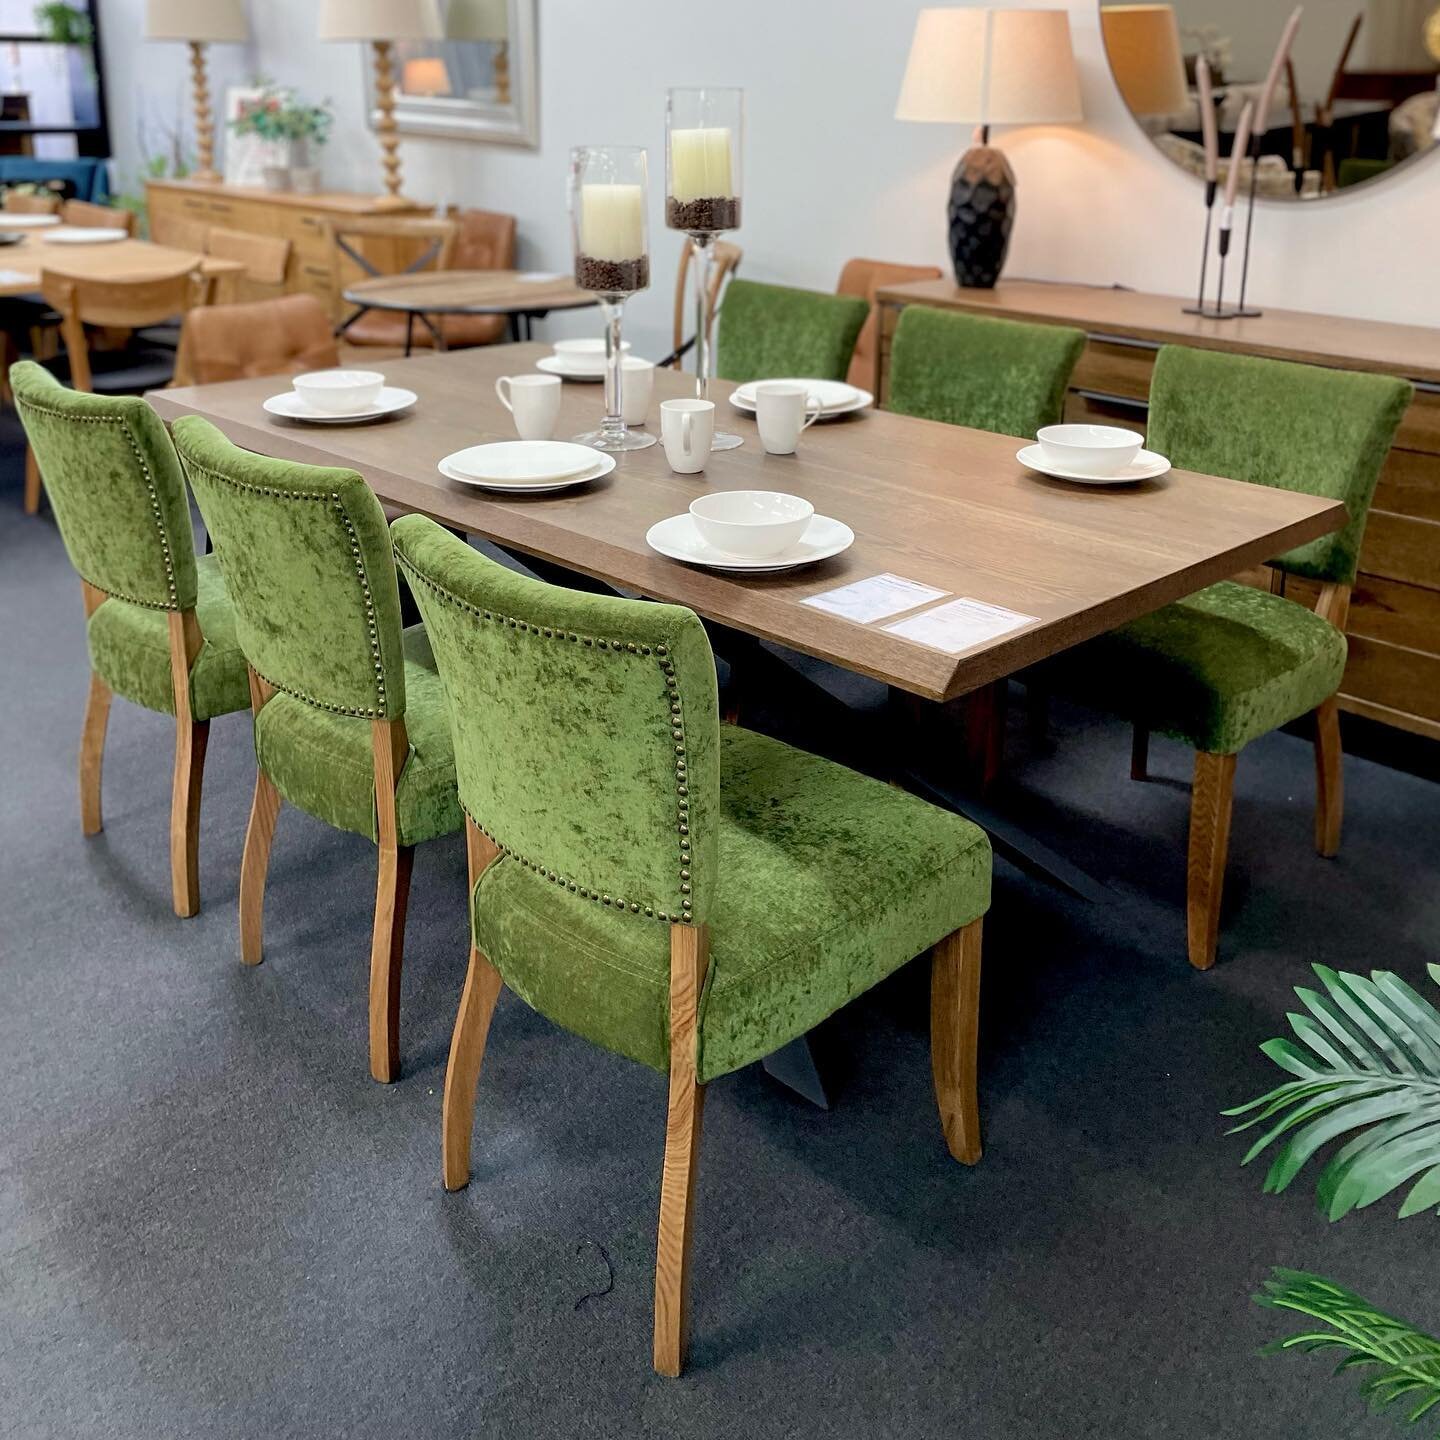 Green Space 🌳

You many have noticed green is having its moment in interiors and fashion. We can see why, it has a calming and grounding effect, while also working well with many other colours. Don&rsquo;t be afraid to add some green to your home! ?